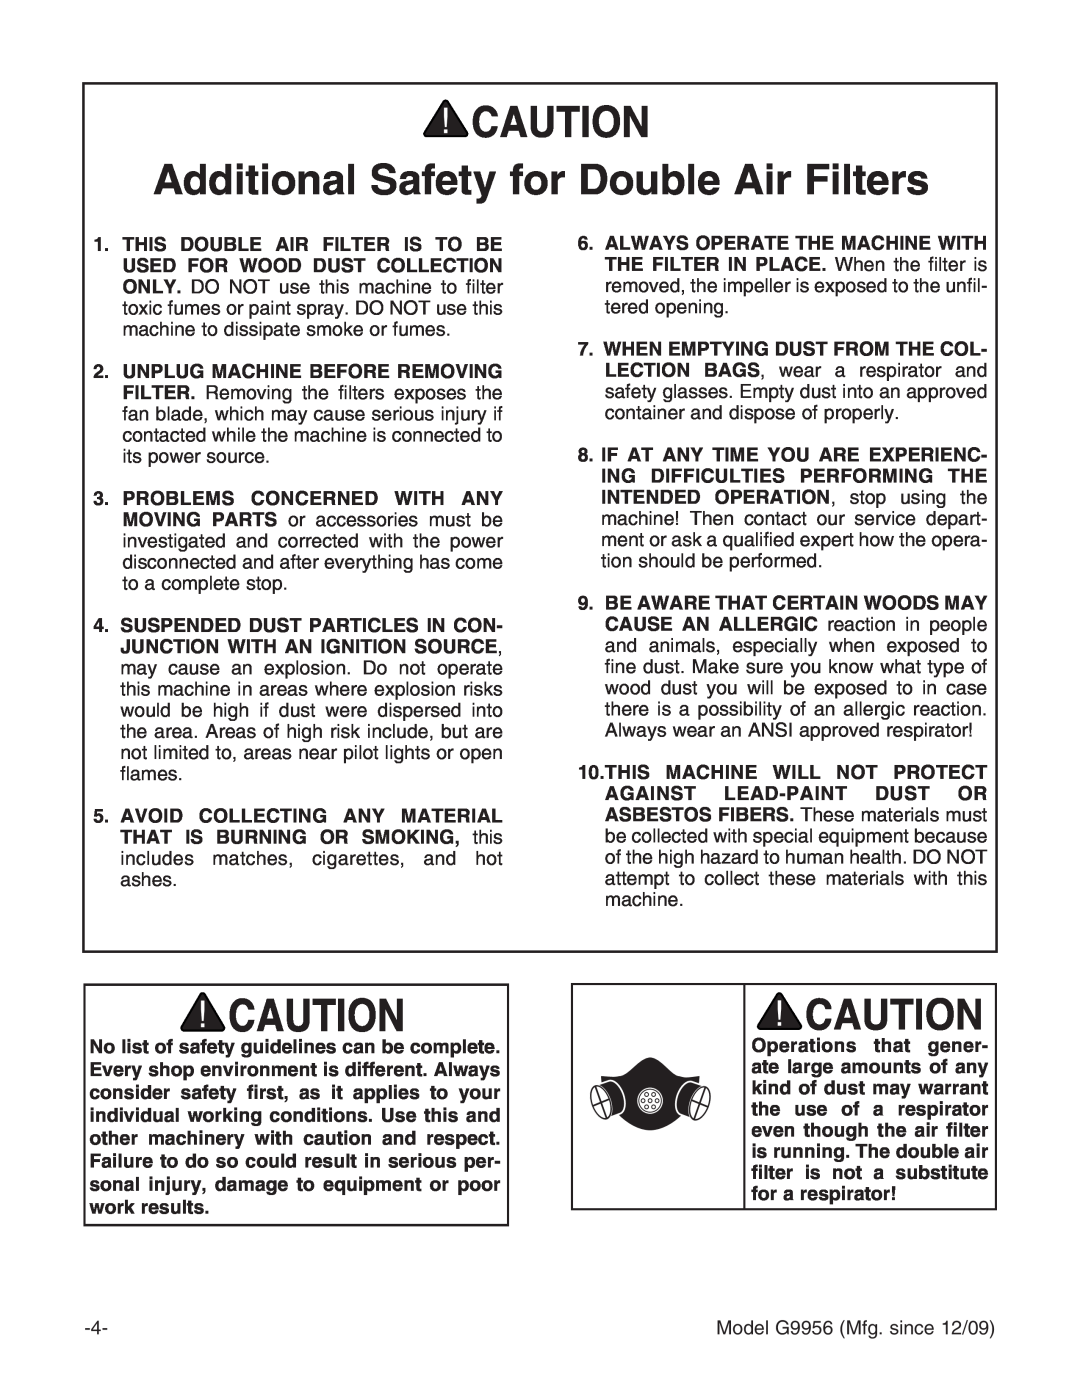 Grizzly G9956 instruction manual Additional Safety for Double Air Filters 